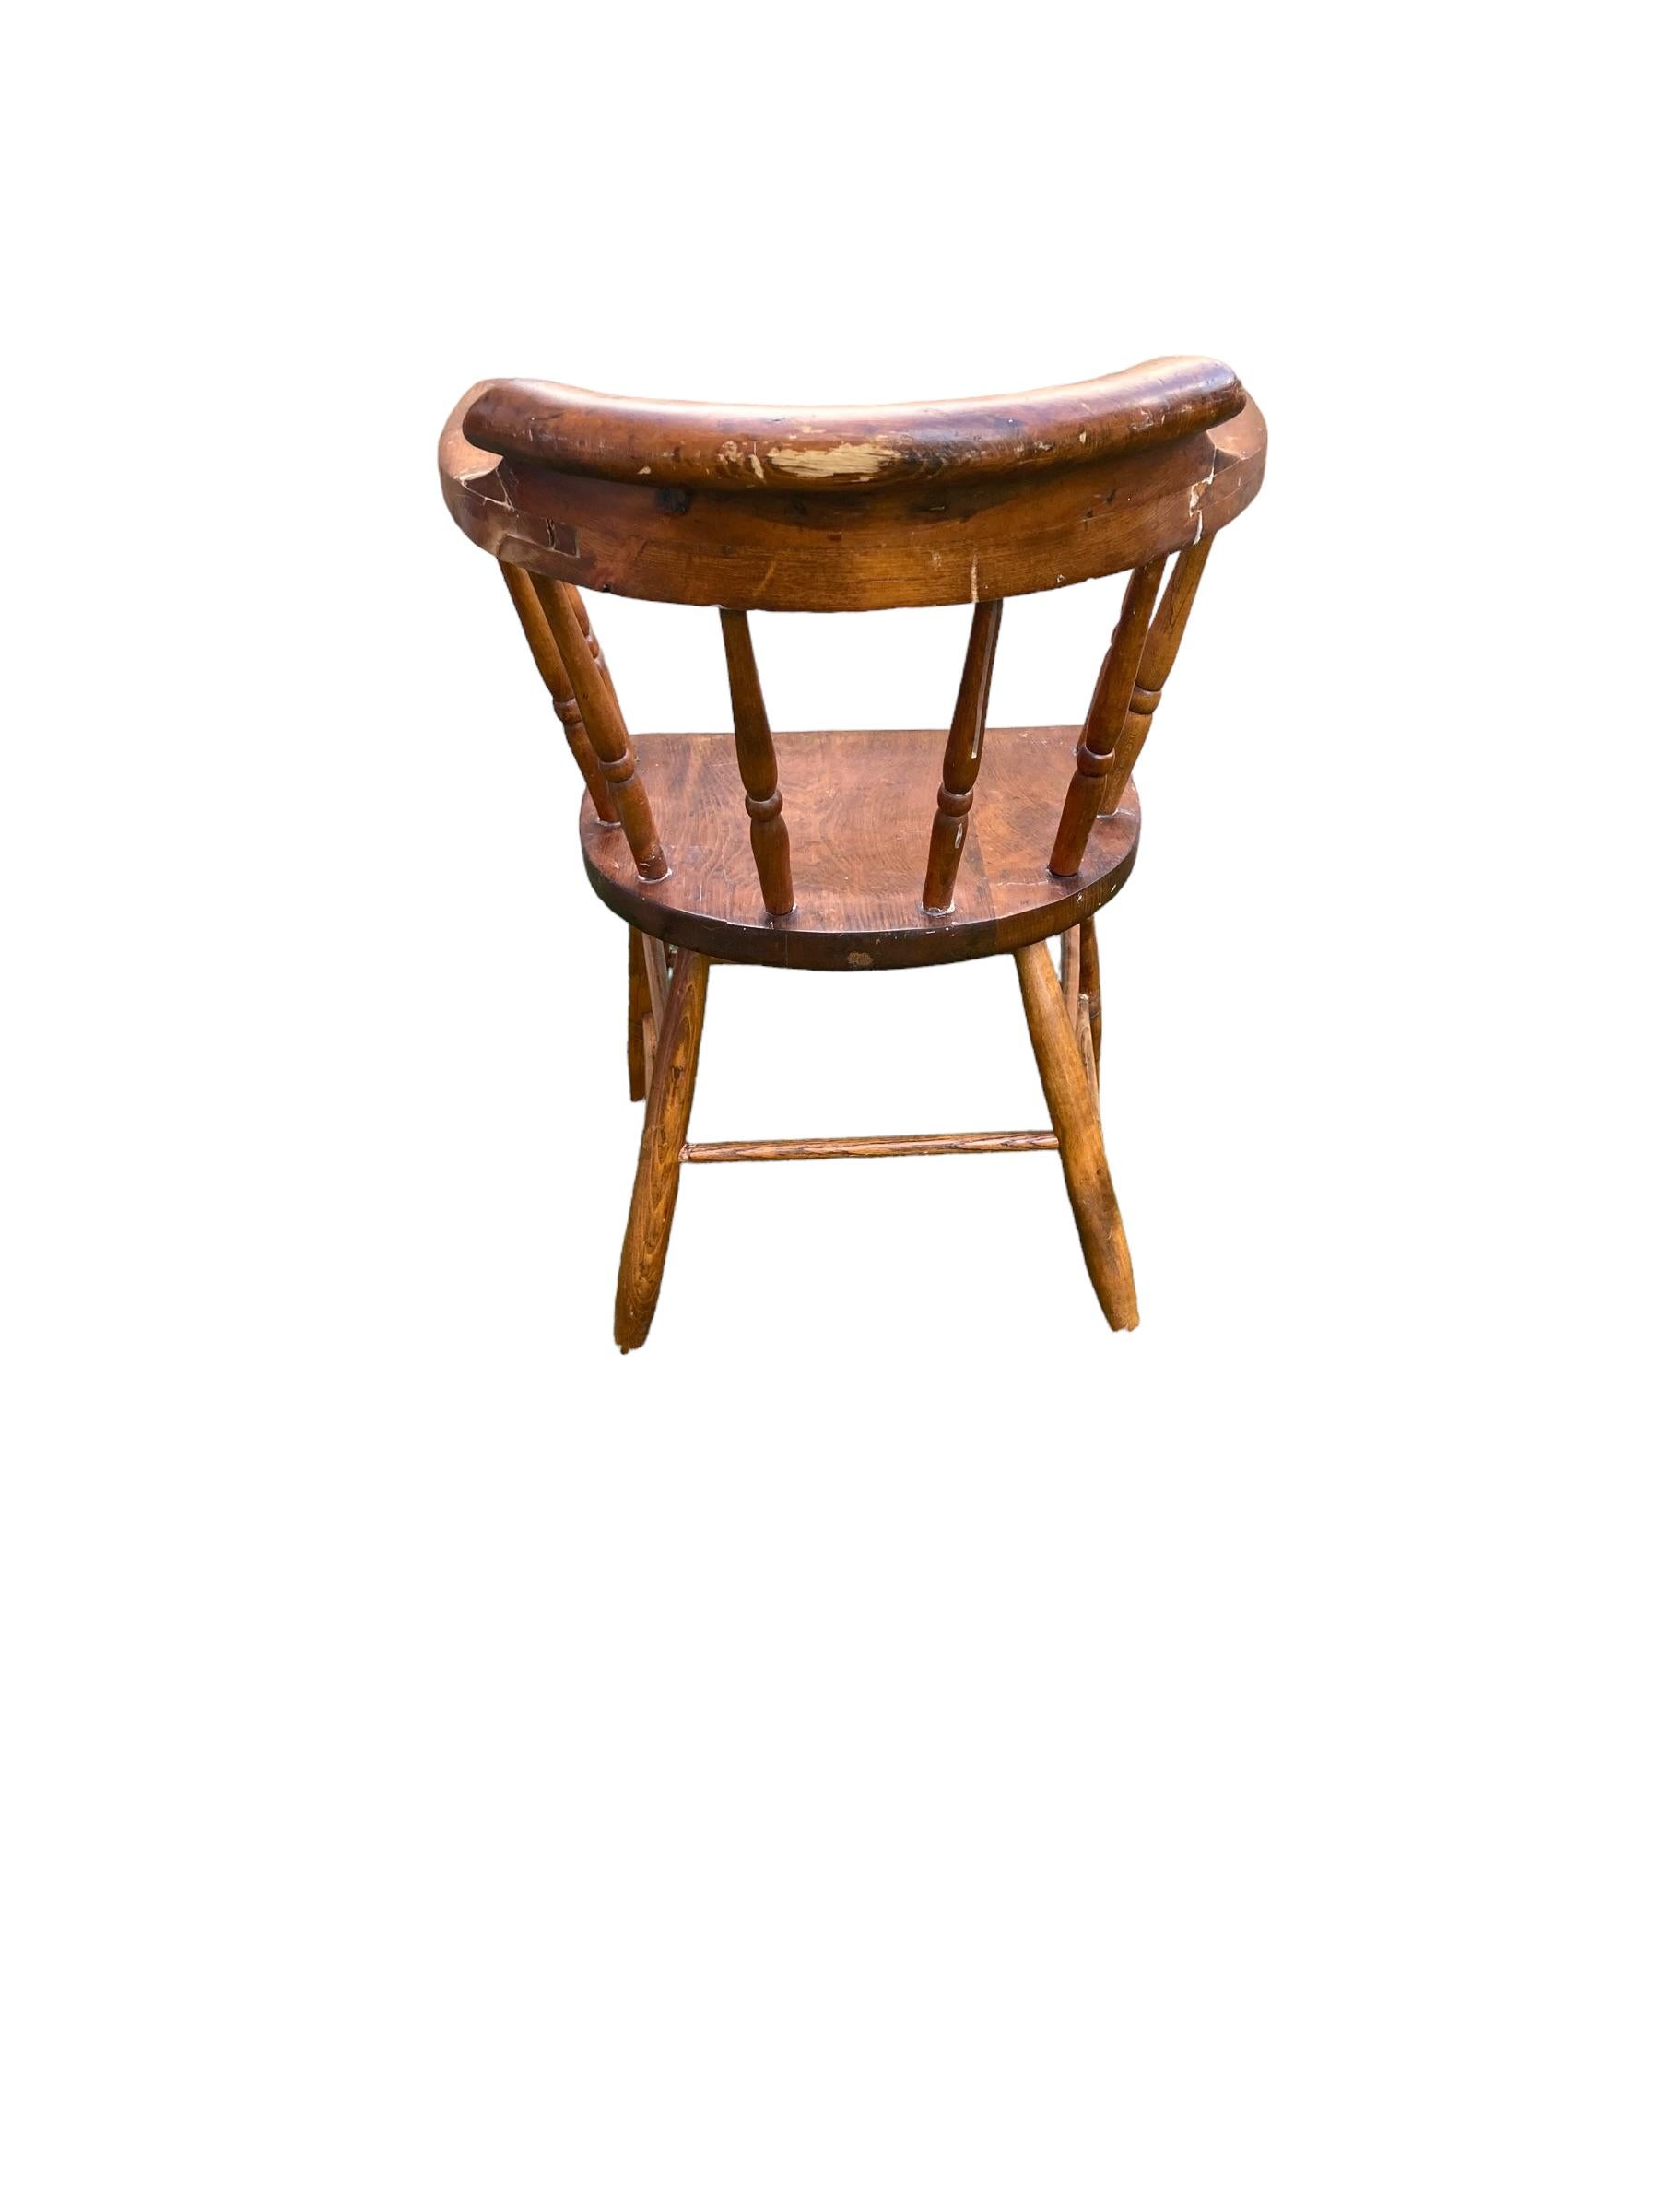 Beech Antique Captains or Smokers Bow back armchair